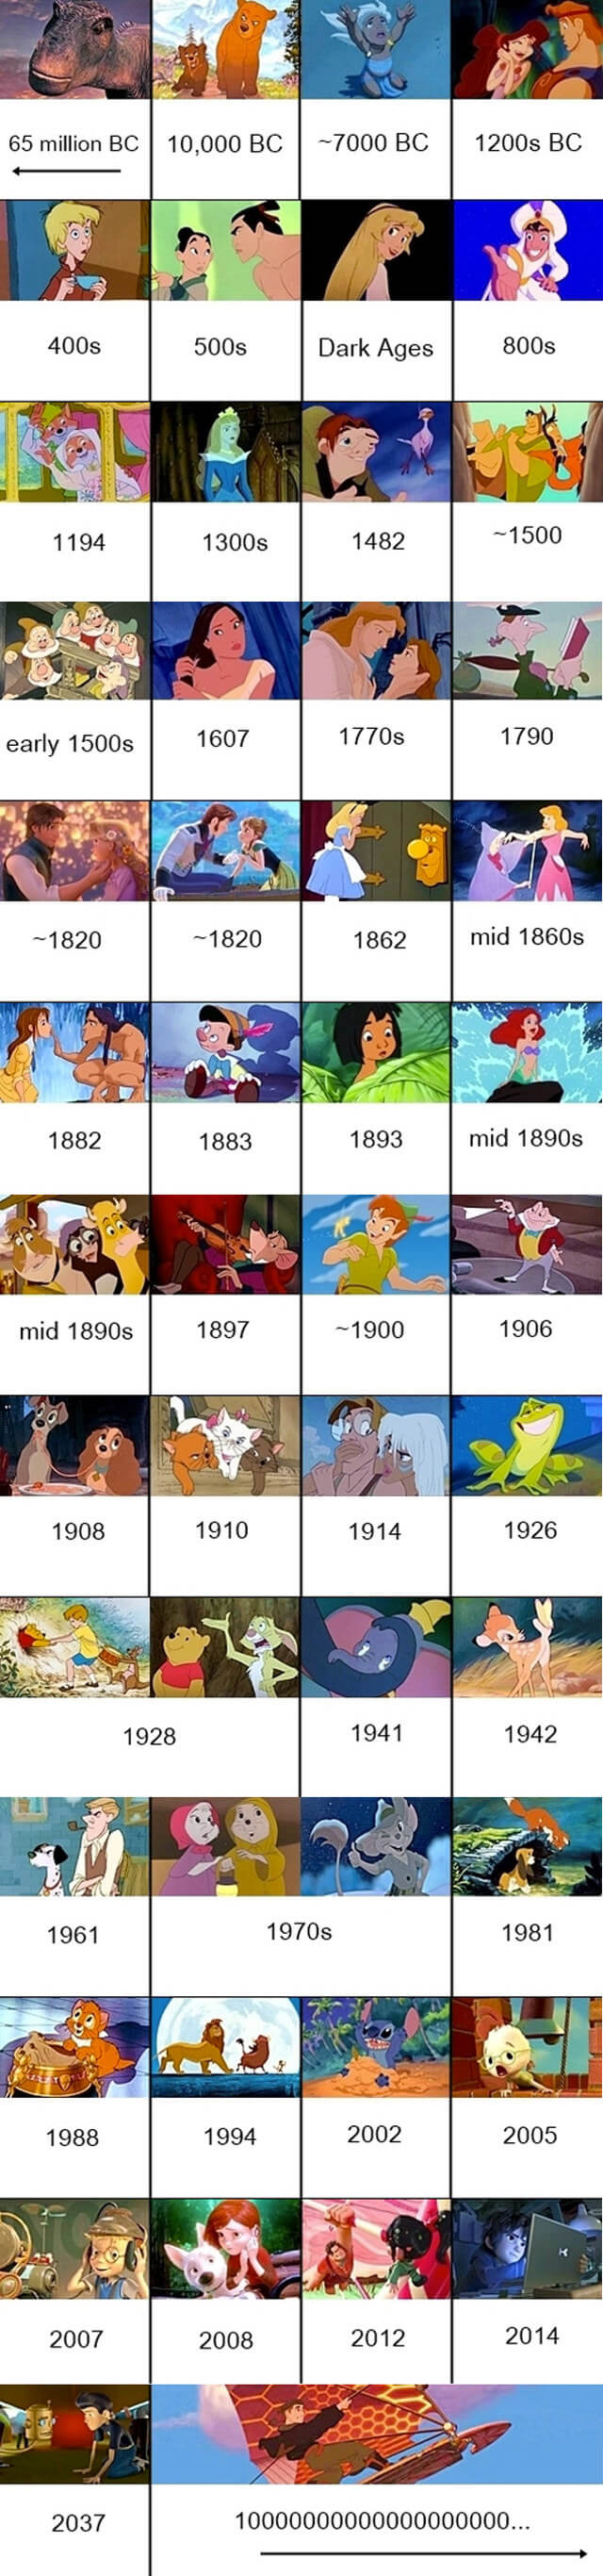 FUN STUFF: Disney's animated movies placed in chronological order - Midroad  Movie Review